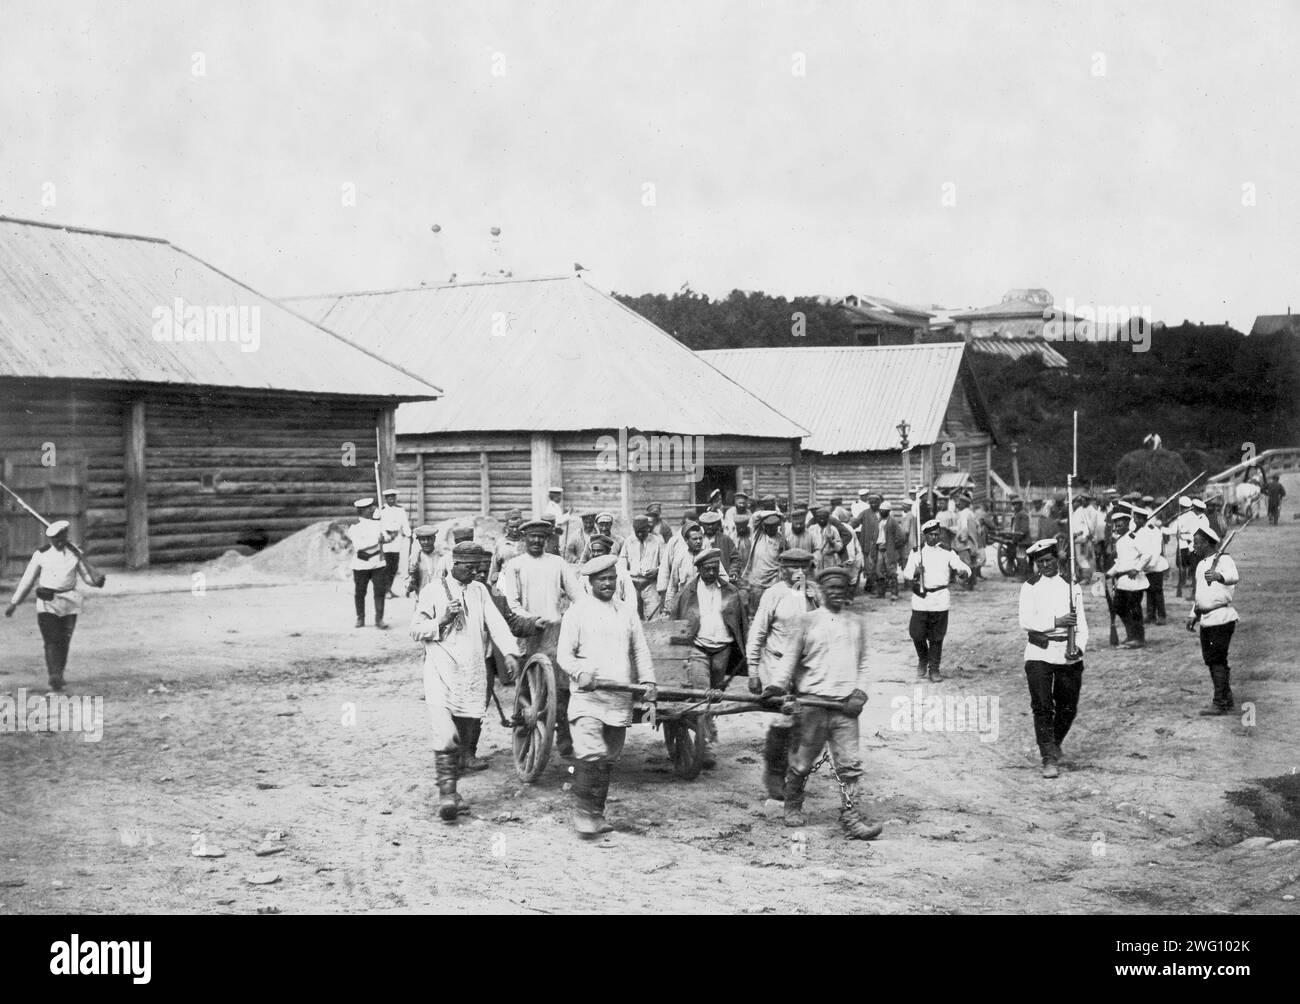 Work of Hard Labor Convicts, 1890. The photographs were taken on Sakhalin Island during the late 19th and early 20th centuries and provide rare glimpses of the island's settlements, prisons, and inhabitants. Sakhalin Island was used by imperial Russia as a penal colony and place of exile for criminals and political prisoners. The collection depicts public life and institutions in the town of Aleksandrovsk Post, convicts working under harsh conditions or in chains, and political prisoners. The photographs also show the daily life both of the Nivkh people, indigenous to the northern part of the Stock Photo